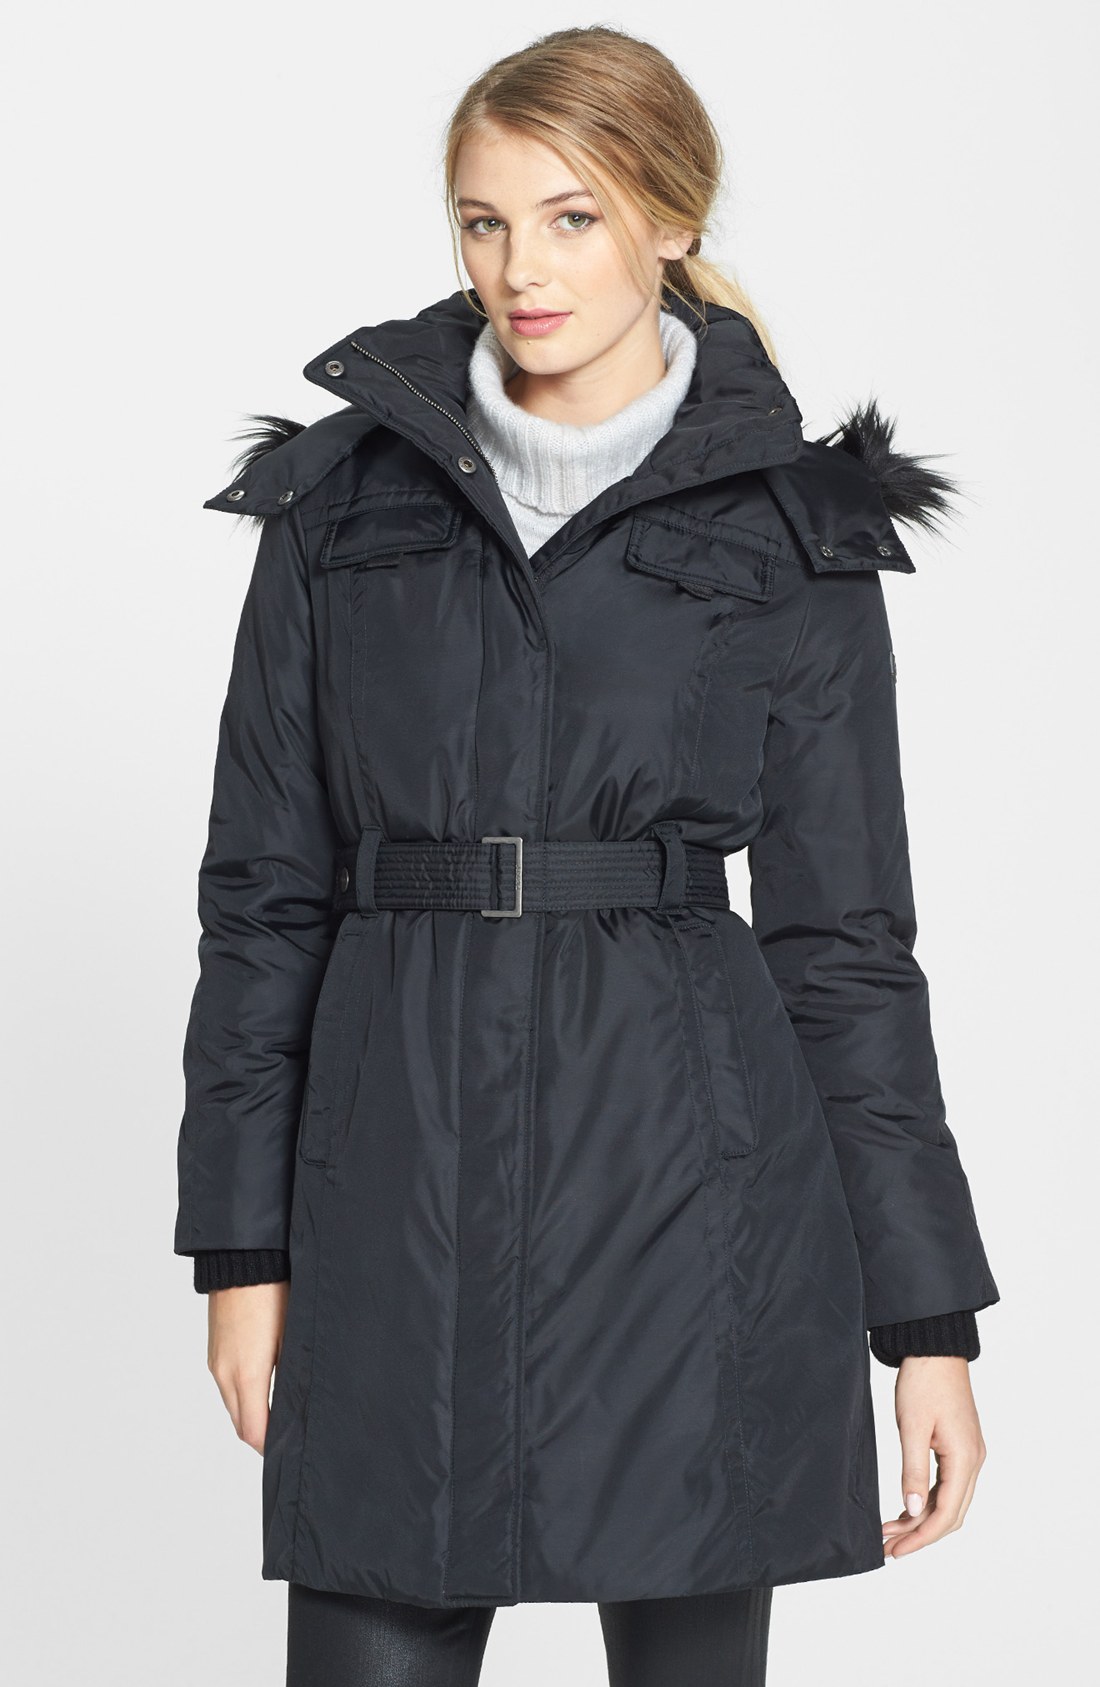 Dkny Faux Fur Trim Belted Down Feather Coat in Black | Lyst